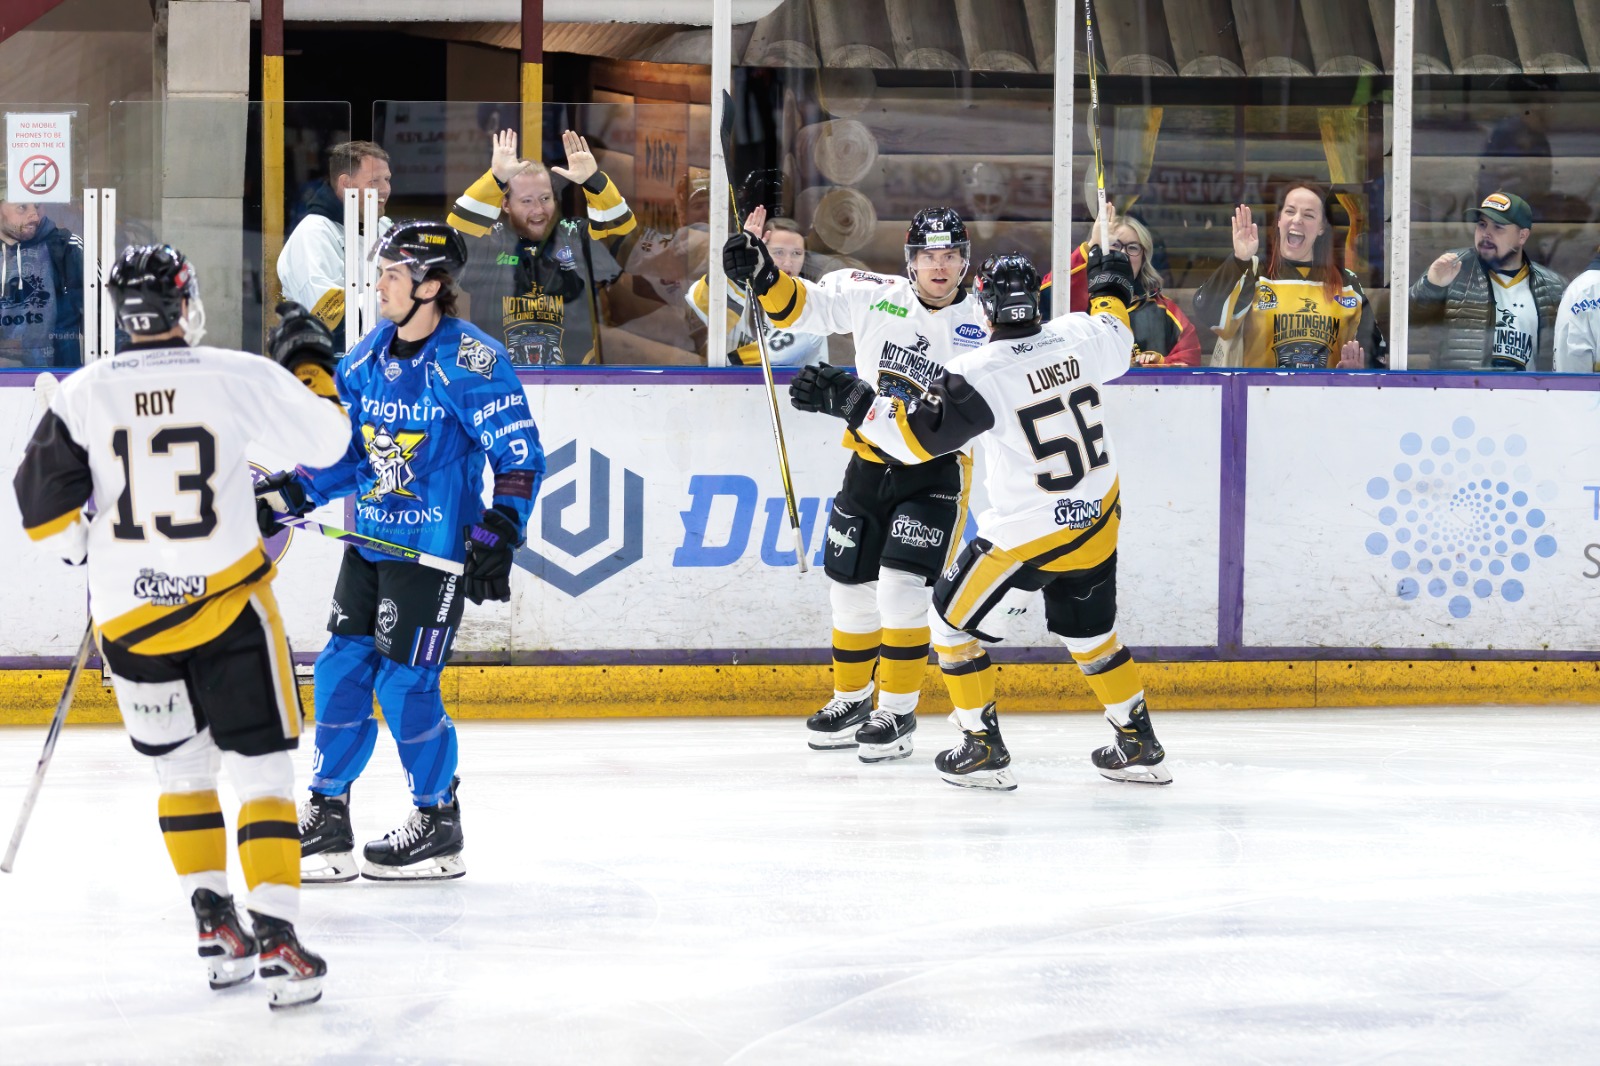 PREVIEW: CUP TRIP TO MANCHESTER FOR PANTHERS Top Image